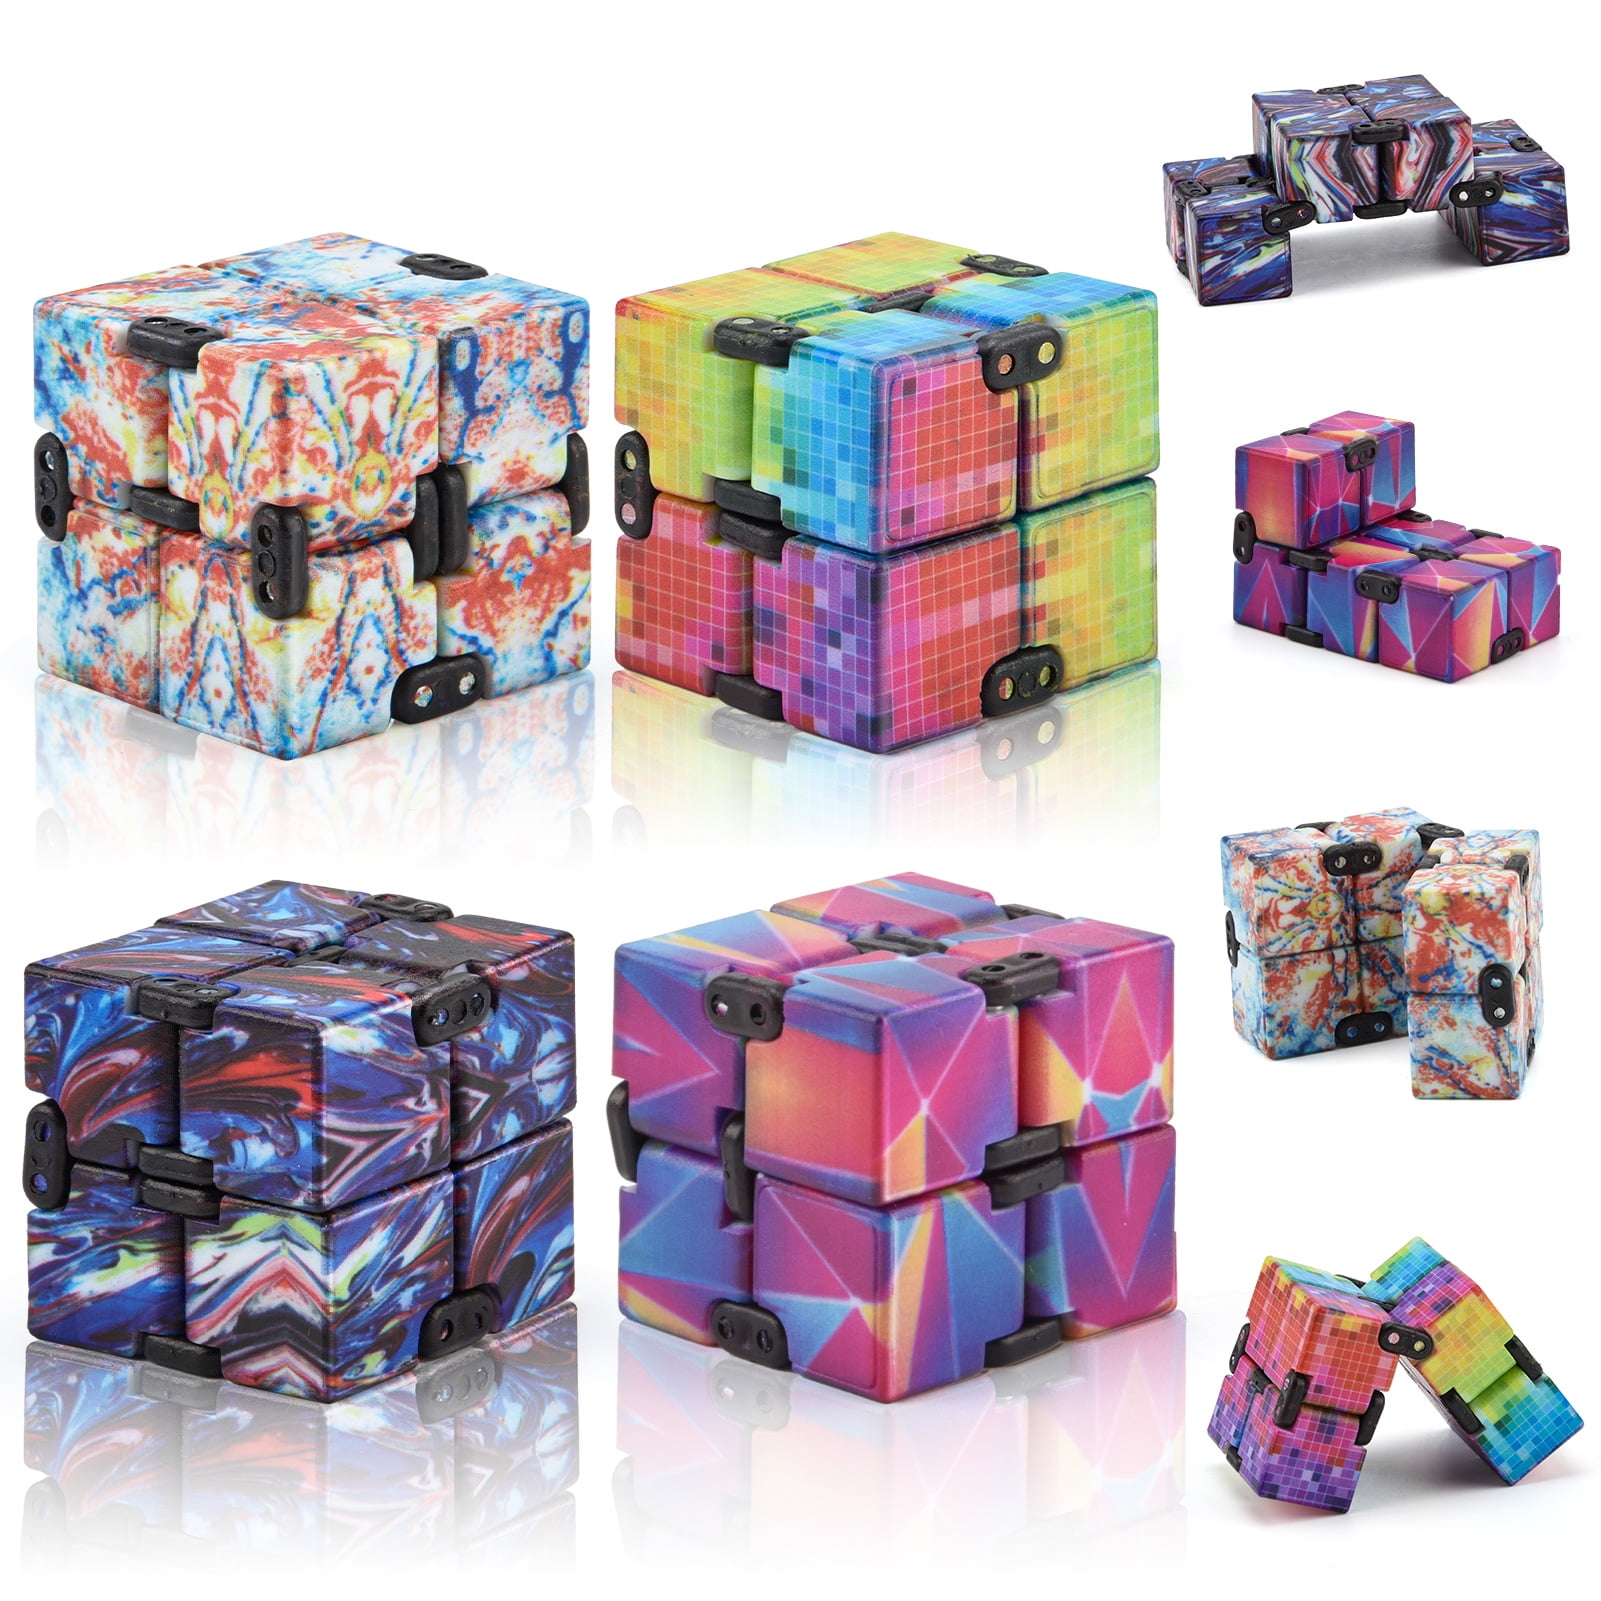 12 Sided Fidget Cube ADHD Autism Kids and Adults Green/Colorful DGT1001 ATIC Fidget Twiddle Cube Dodecagon Rubiks Cube Stress Relief Hand Toy Decompression for ADD 